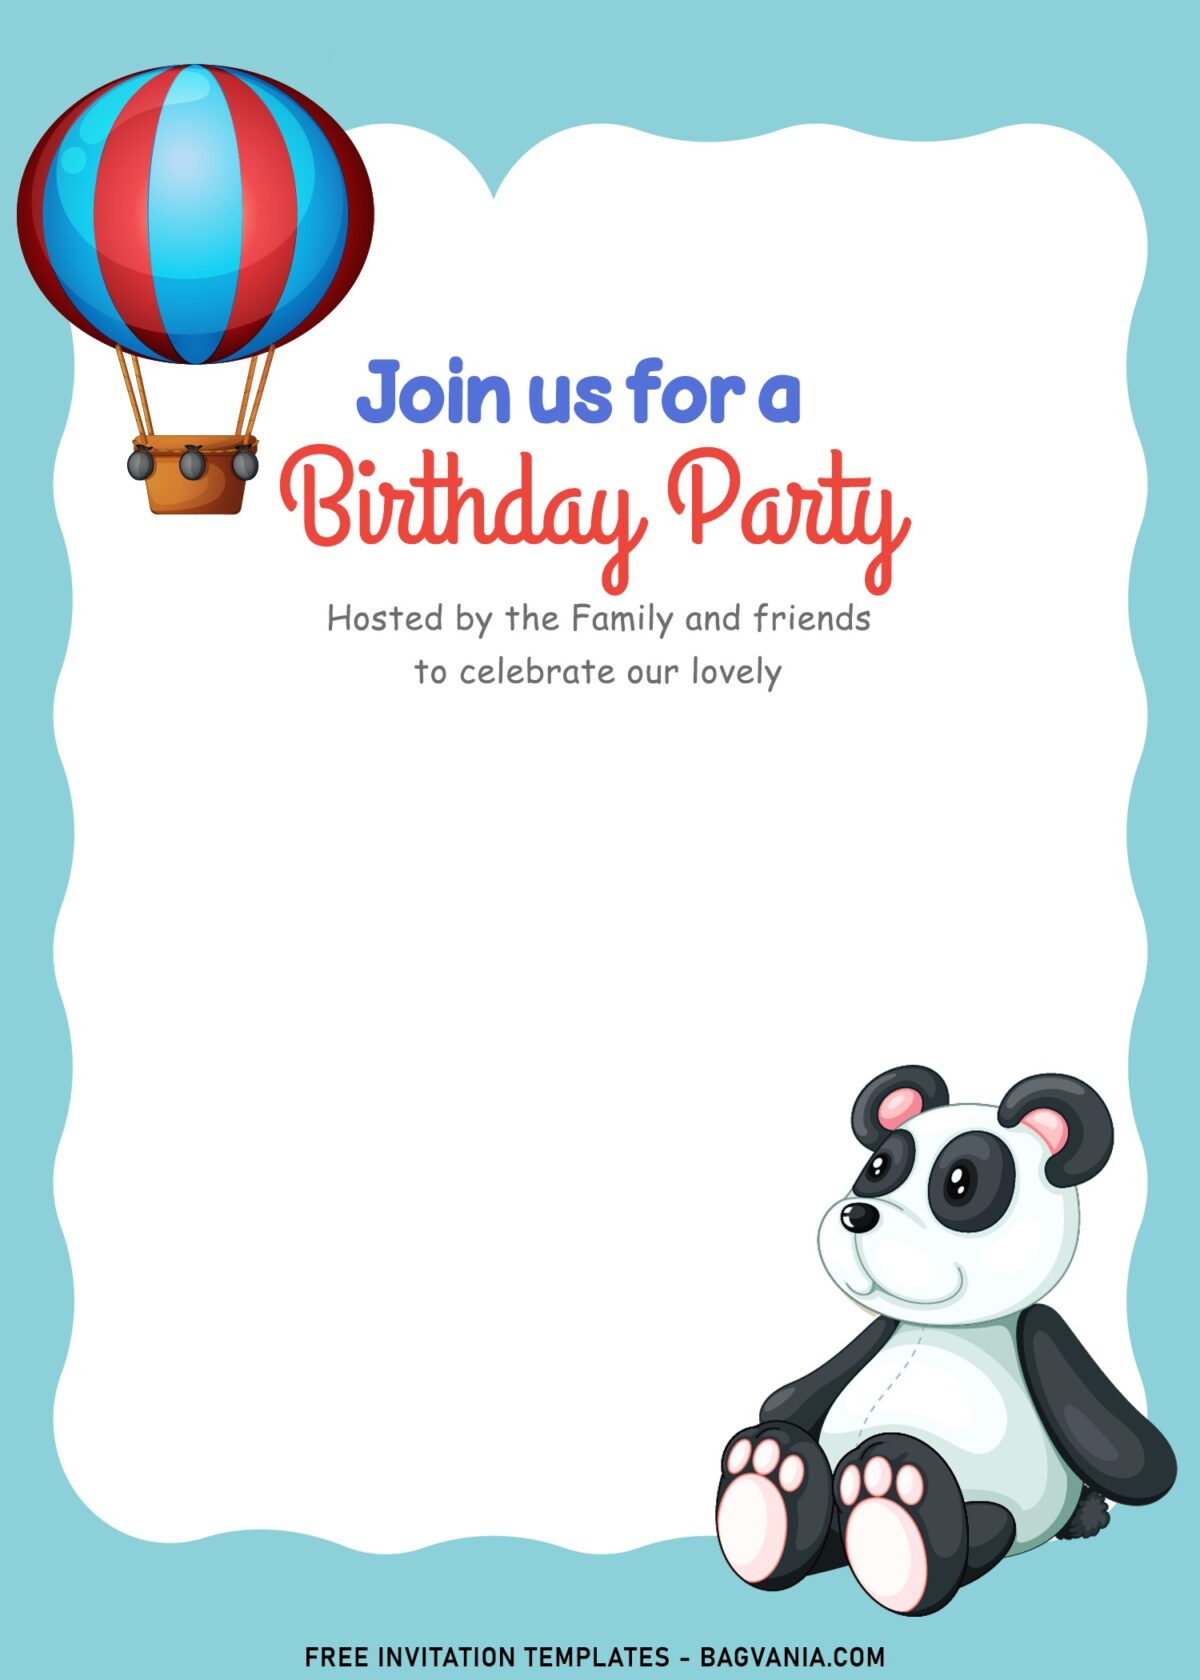 10+ Best And Cute Birthday Invitation Templates For Preschooler with adorable panda